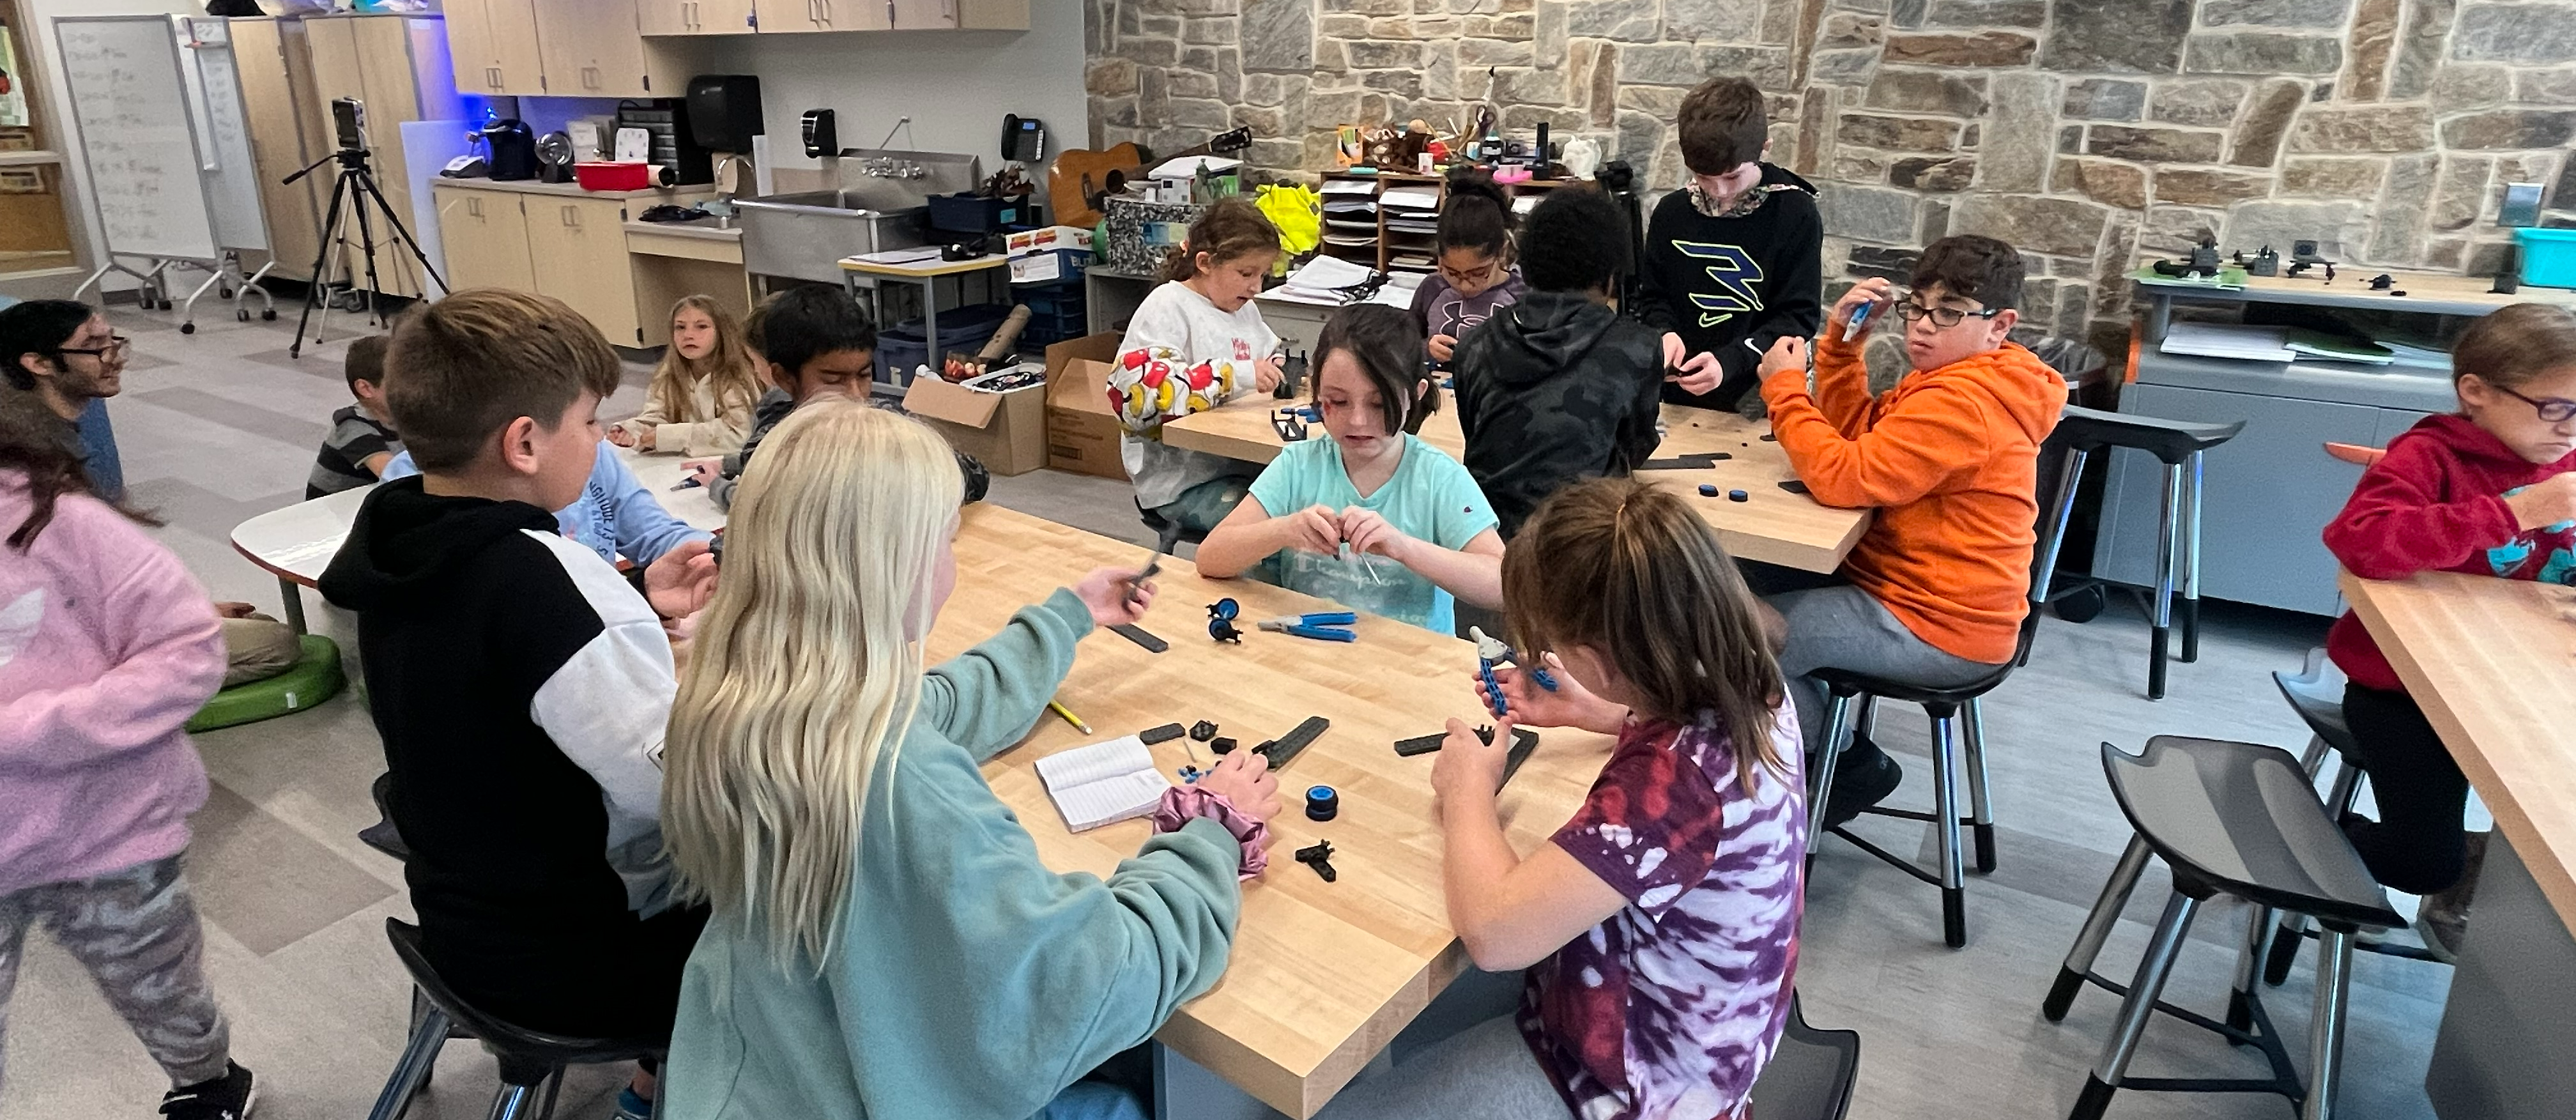 students working in STEAM class